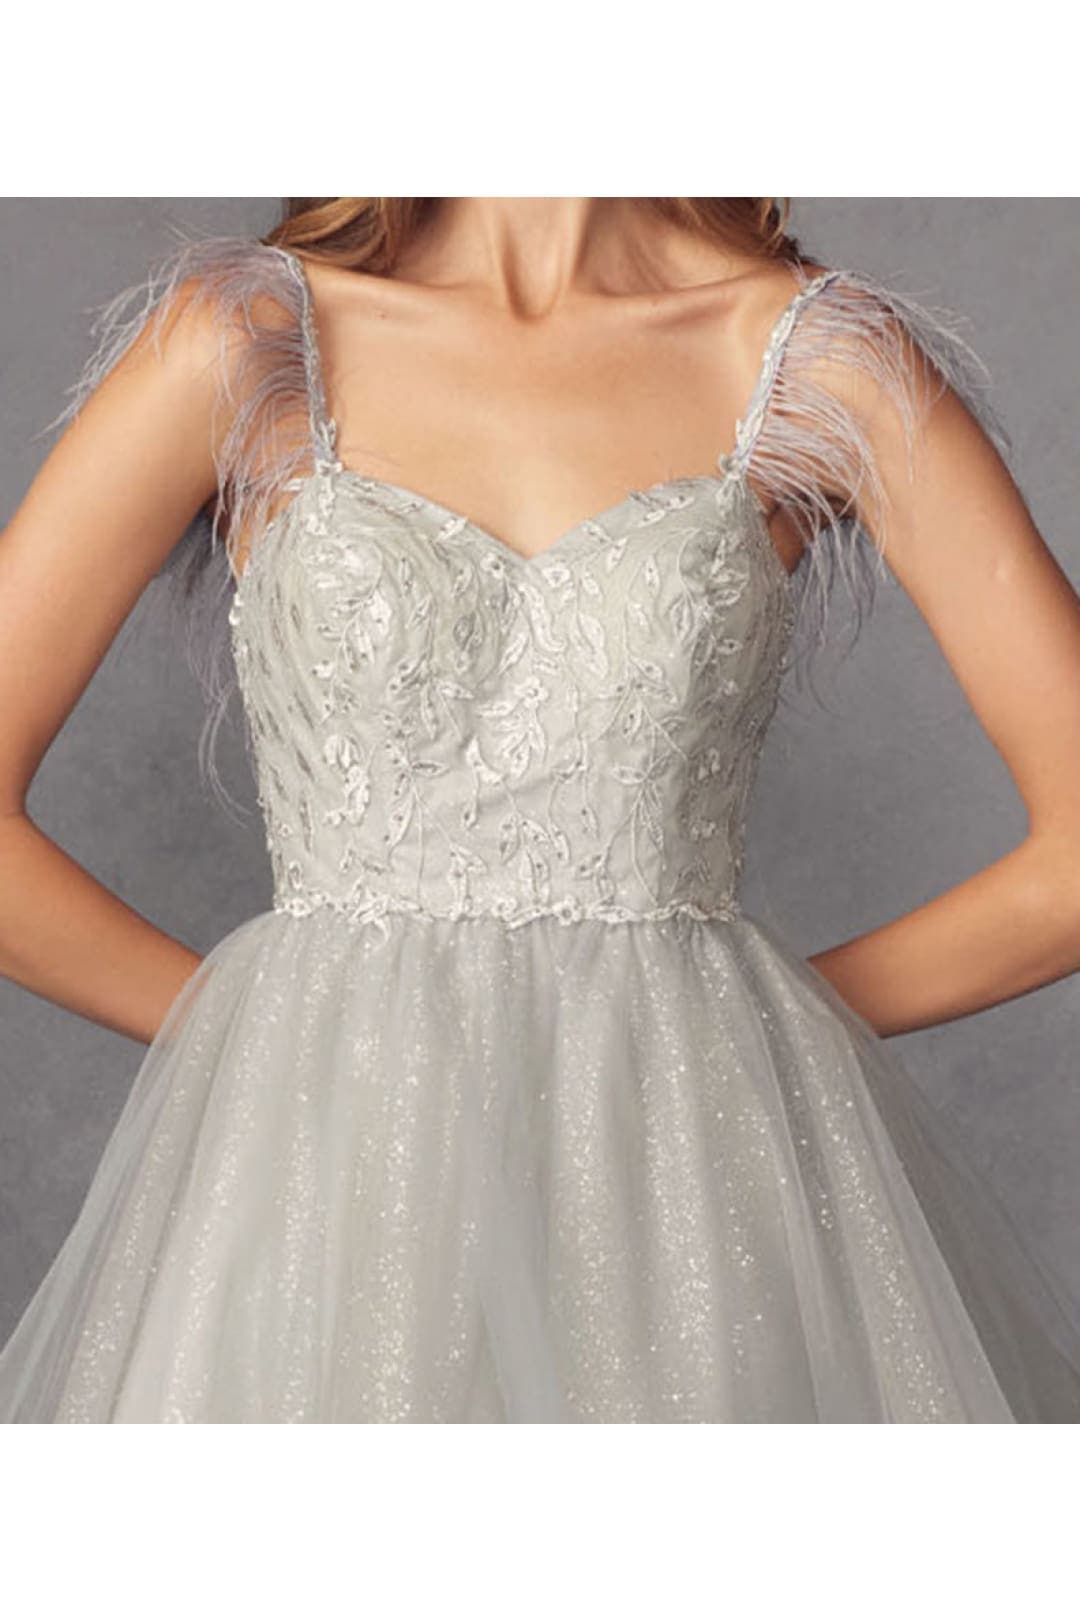 Juliet 881 Feathers A-line Glitter Sweetheart Cocktail Tulle Dress